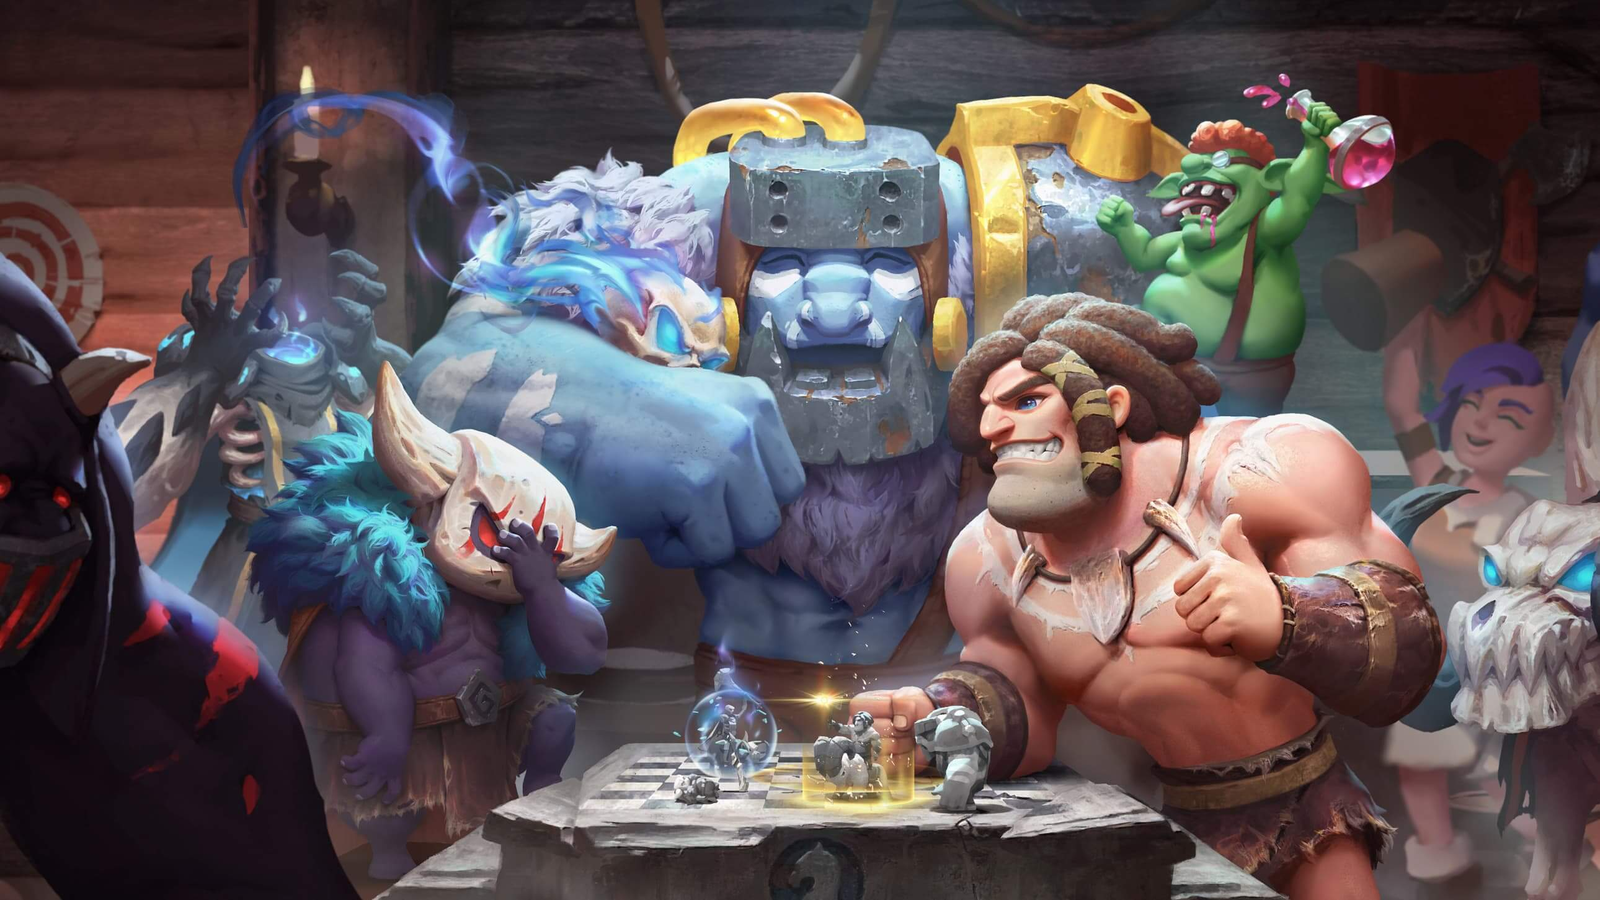 AutoChess Moba pre-registration is open now! 